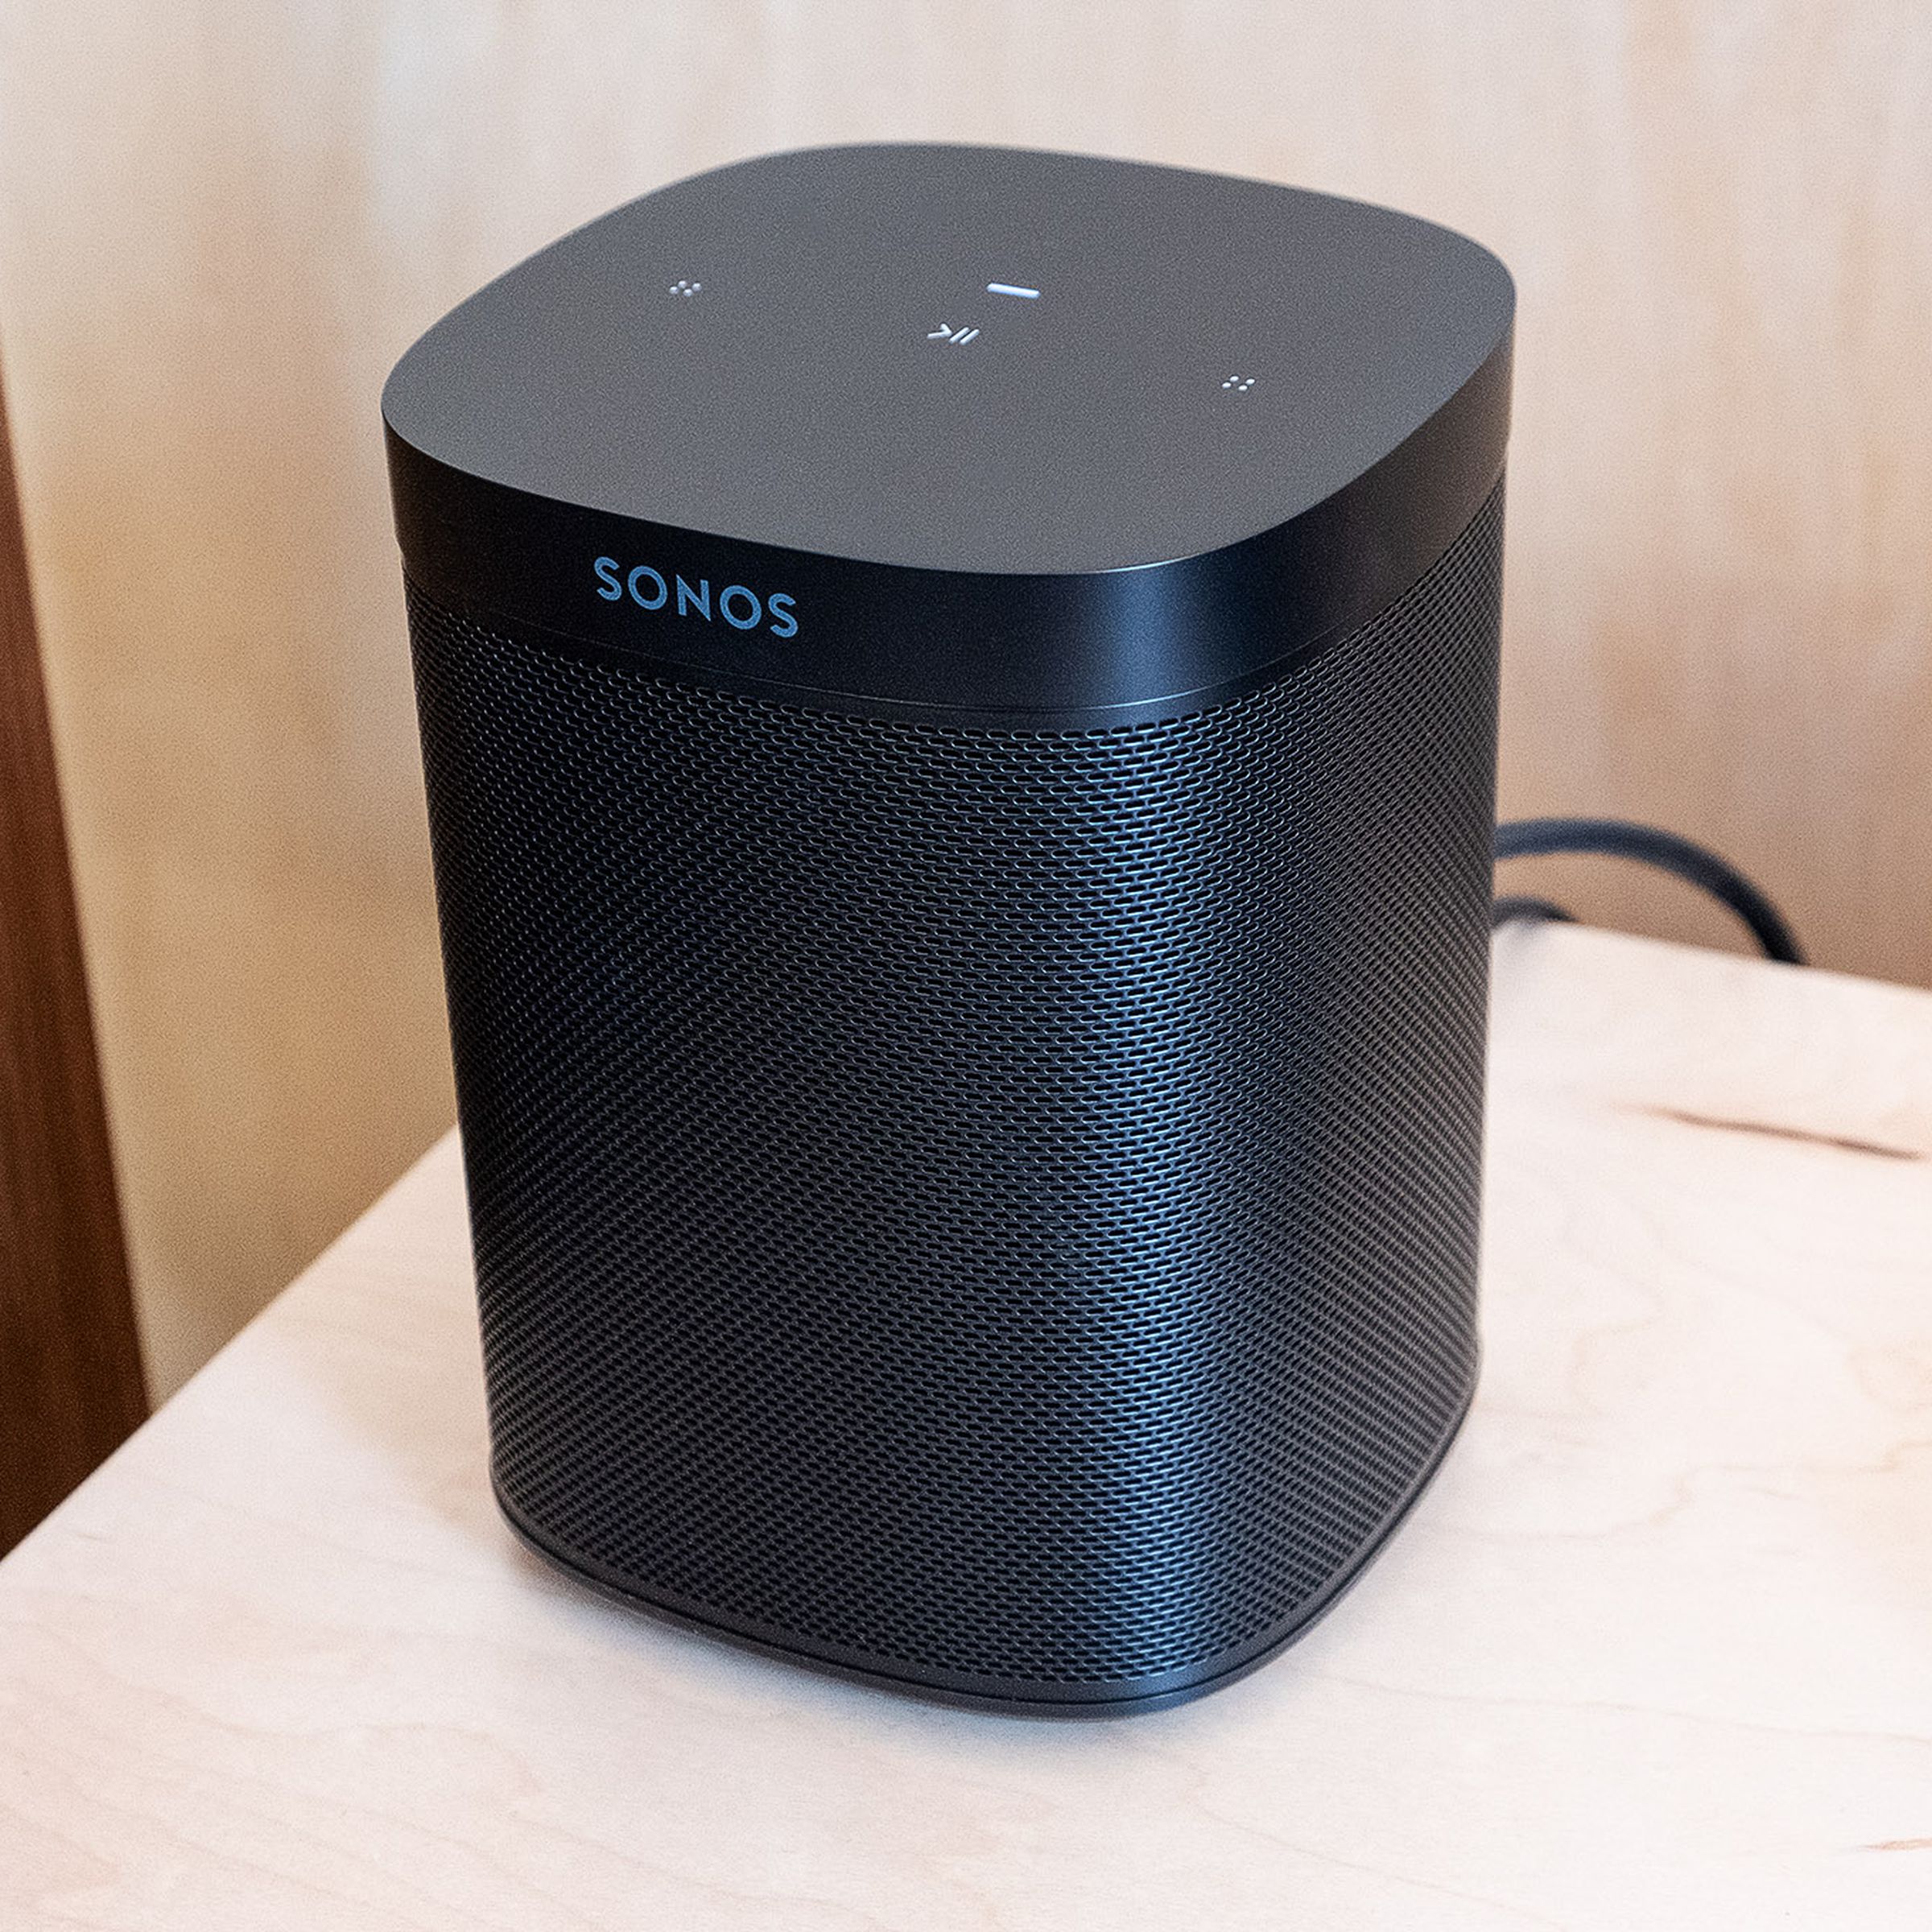 The Sonos One SL sitting on a table.